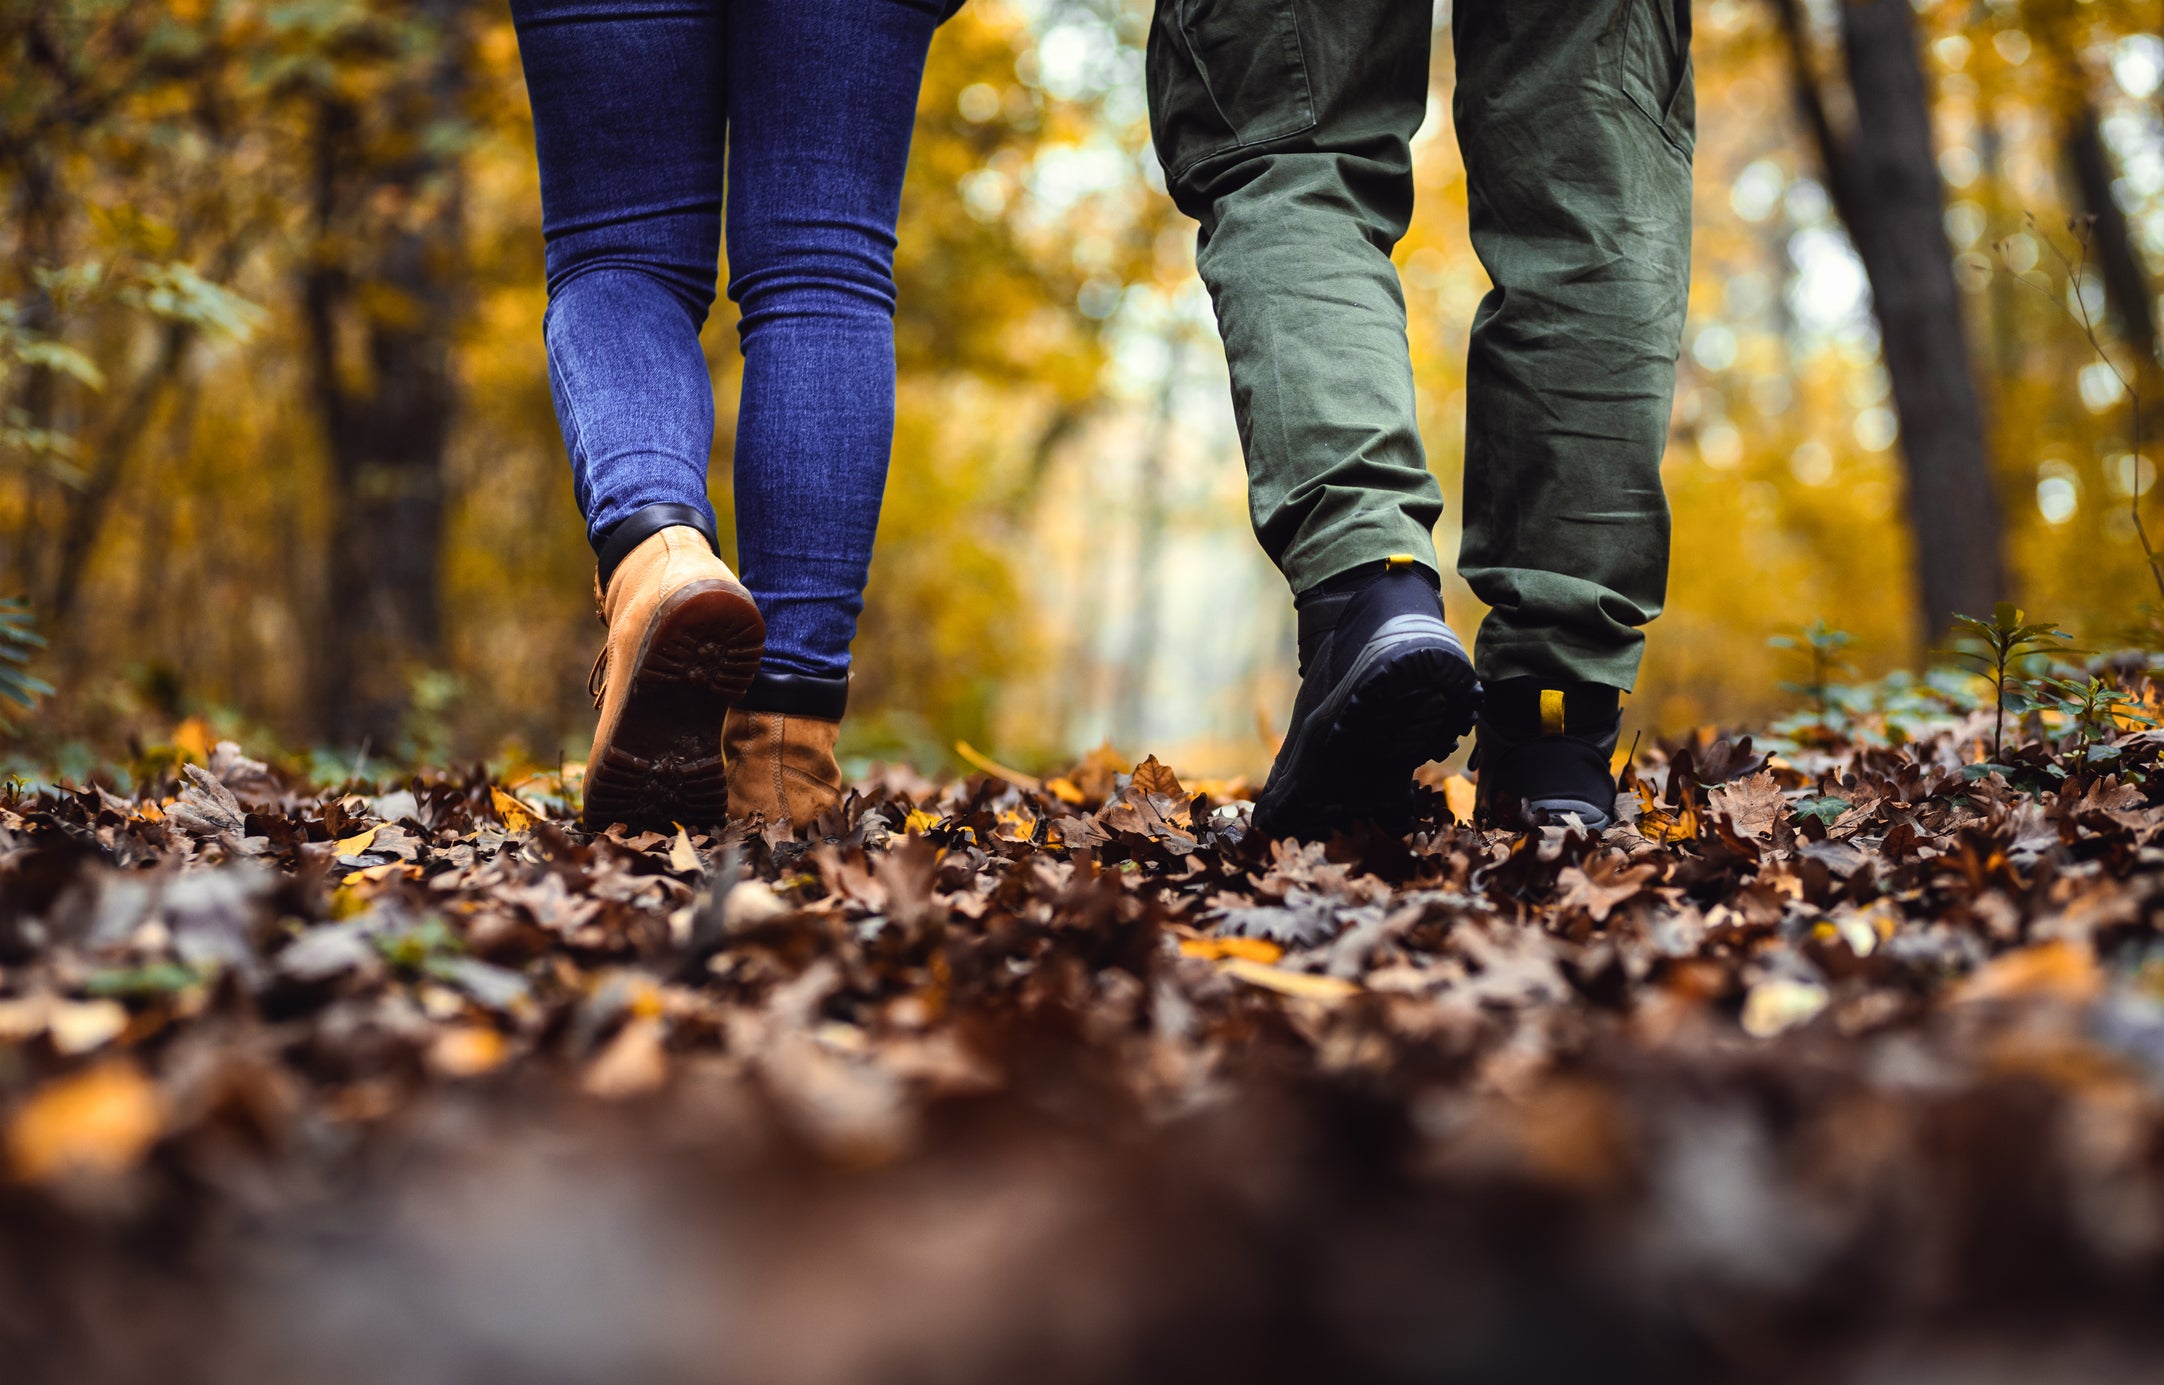 A walk in the park could make a cheap and fun first date